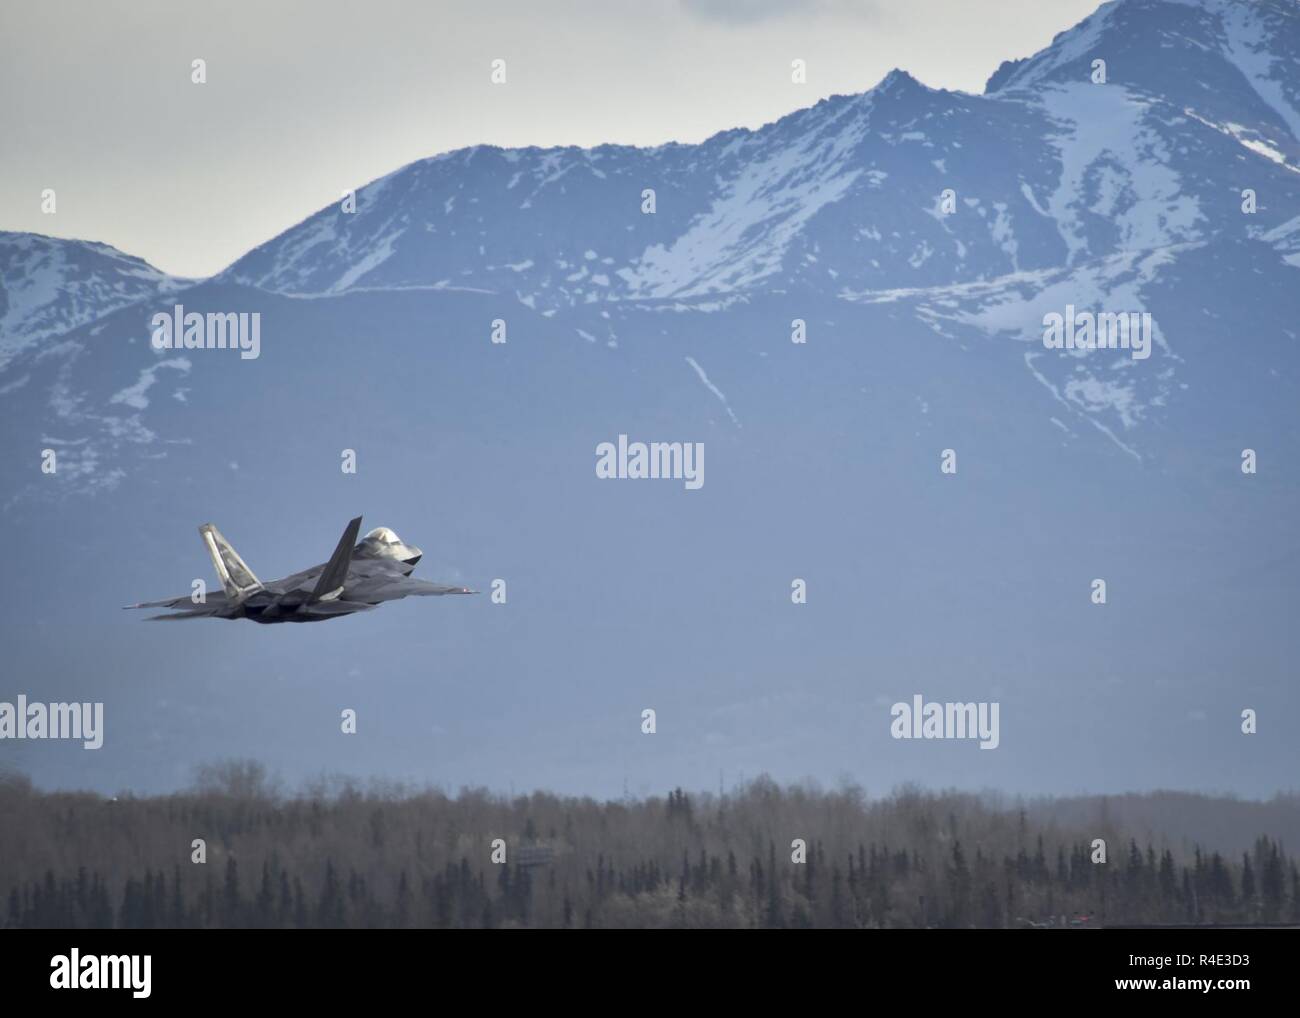 JOINT BASE ELMENDORF-RICHARDSON, Alaska -  An F-22 attached to the 18th Aggressor Squadron from Eielson Air Force Base, Alaska, takes off for a training mission May 1, 2017. Northern Edge 2017 is Alaska's premiere joint-training exercise designed to practice operations, techniques, and procedures as well as enhance interoperability among the services. Thousands of participants from all the services; Airmen, Soldiers, Sailors, Marines, and Coast Guard personnel from active duty, Reserve and National Guard units, are involved. Stock Photo